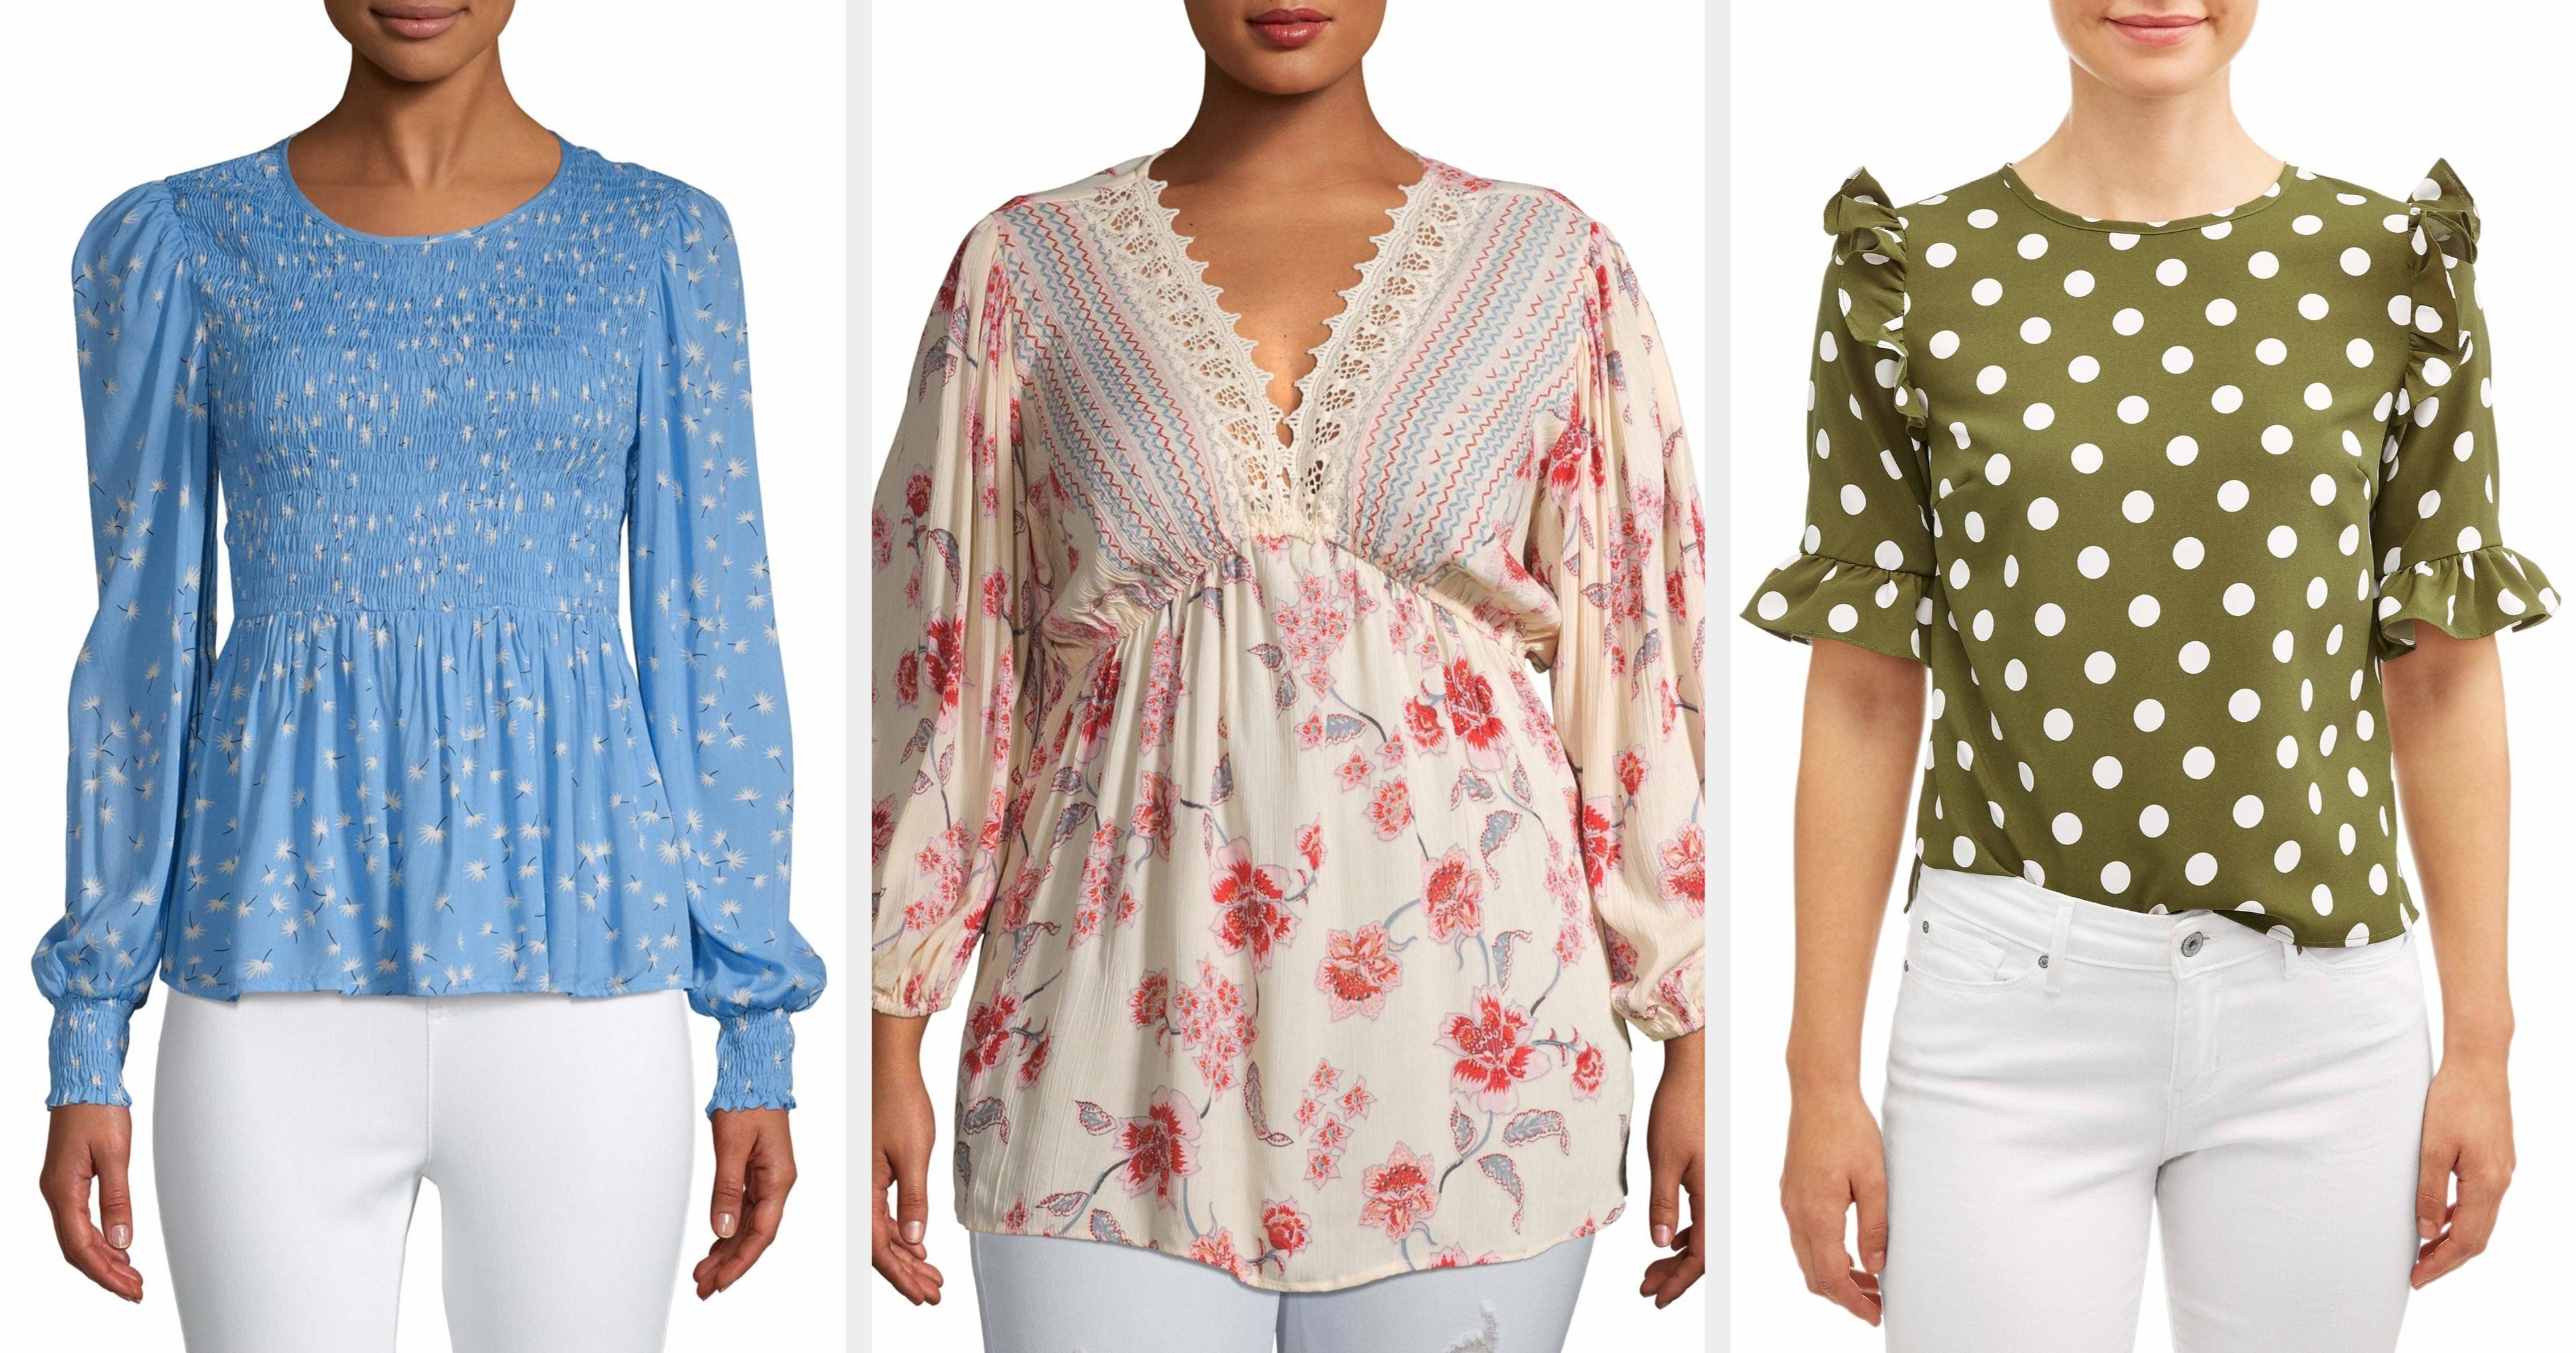 21 Simply Beautiful Tops From Walmart